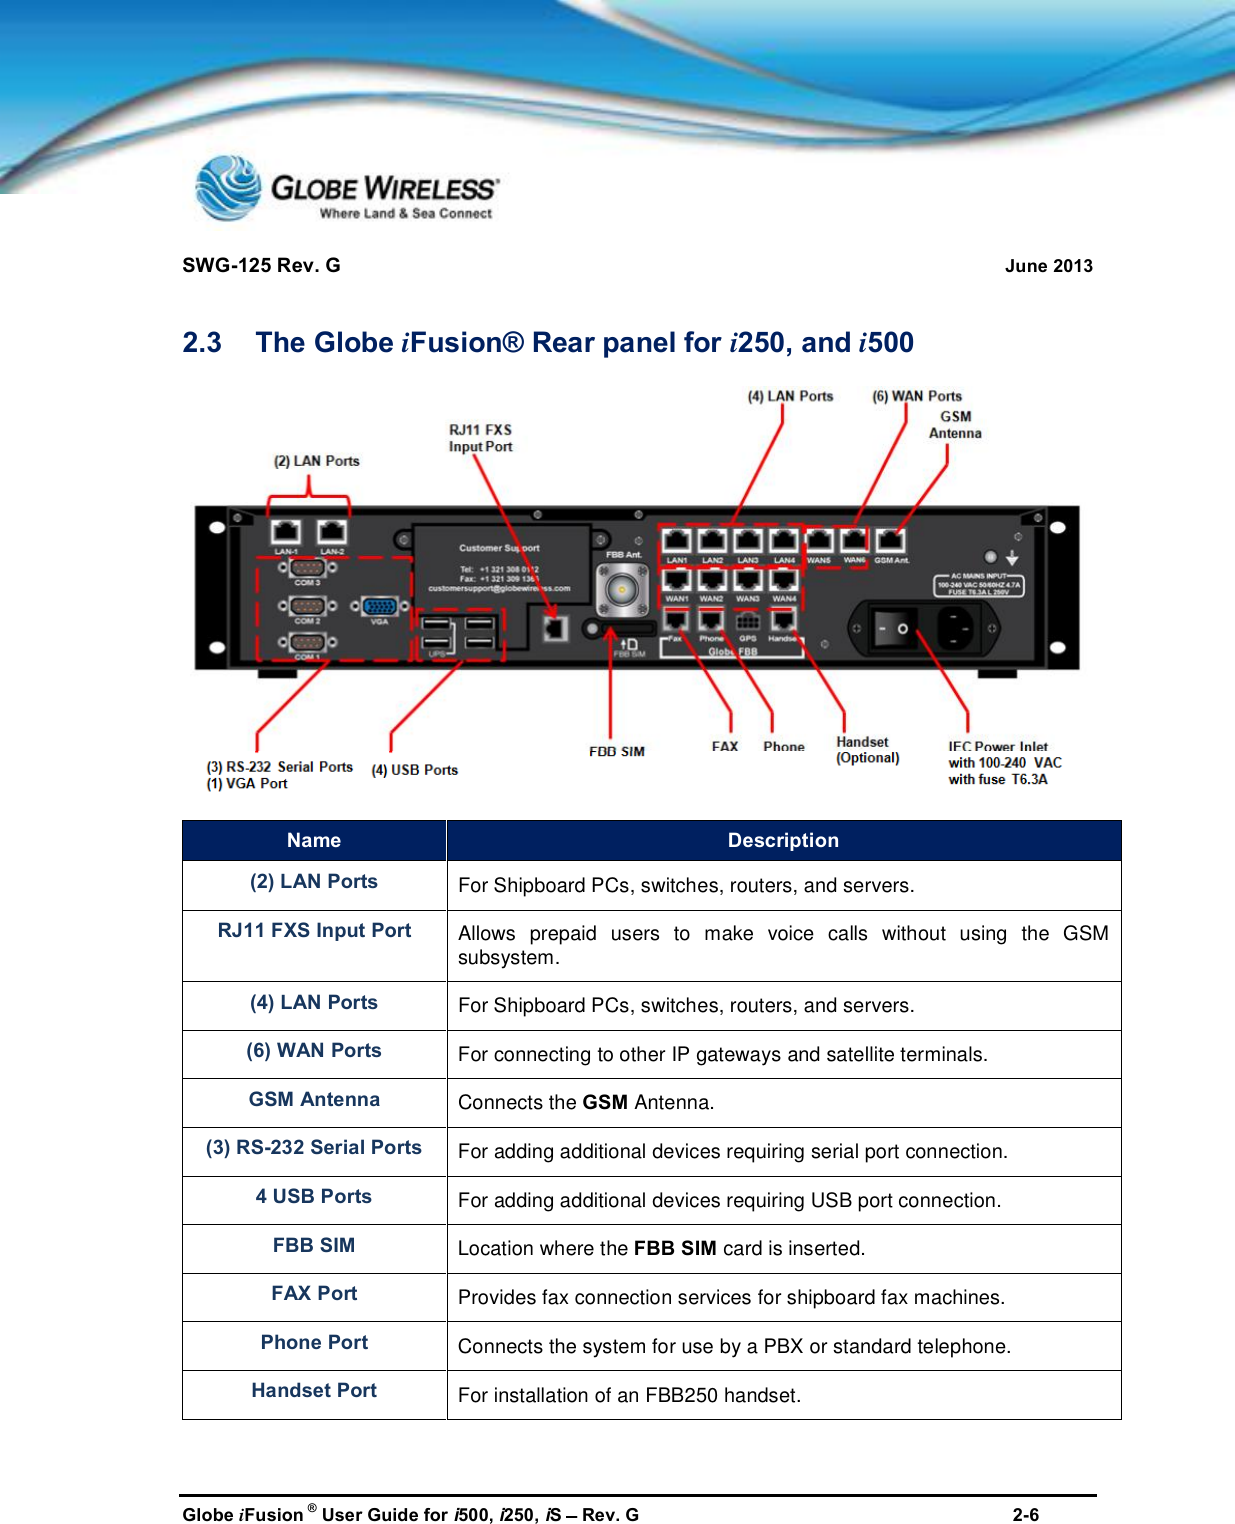 SWG-125 Rev. G June 2013Globe iFusion ®User Guide for i500, i250, iSRev. G 2-62.3 The Globe iFusion® Rear panel for i250, and i500Name Description(2) LAN Ports For Shipboard PCs, switches, routers, and servers.RJ11 FXS Input PortAllows prepaid users to make voice calls without using the GSMsubsystem.(4) LAN Ports For Shipboard PCs, switches, routers, and servers.(6) WAN Ports For connecting to other IP gateways and satellite terminals.GSM Antenna Connects the GSM Antenna.(3) RS-232 Serial Ports For adding additional devices requiring serial port connection.4 USB Ports For adding additional devices requiring USB port connection.FBB SIM Location where the FBB SIM card is inserted.FAX Port Provides fax connection services for shipboard fax machines.Phone Port Connects the system for use by a PBX or standard telephone.Handset Port For installation of an FBB250 handset.